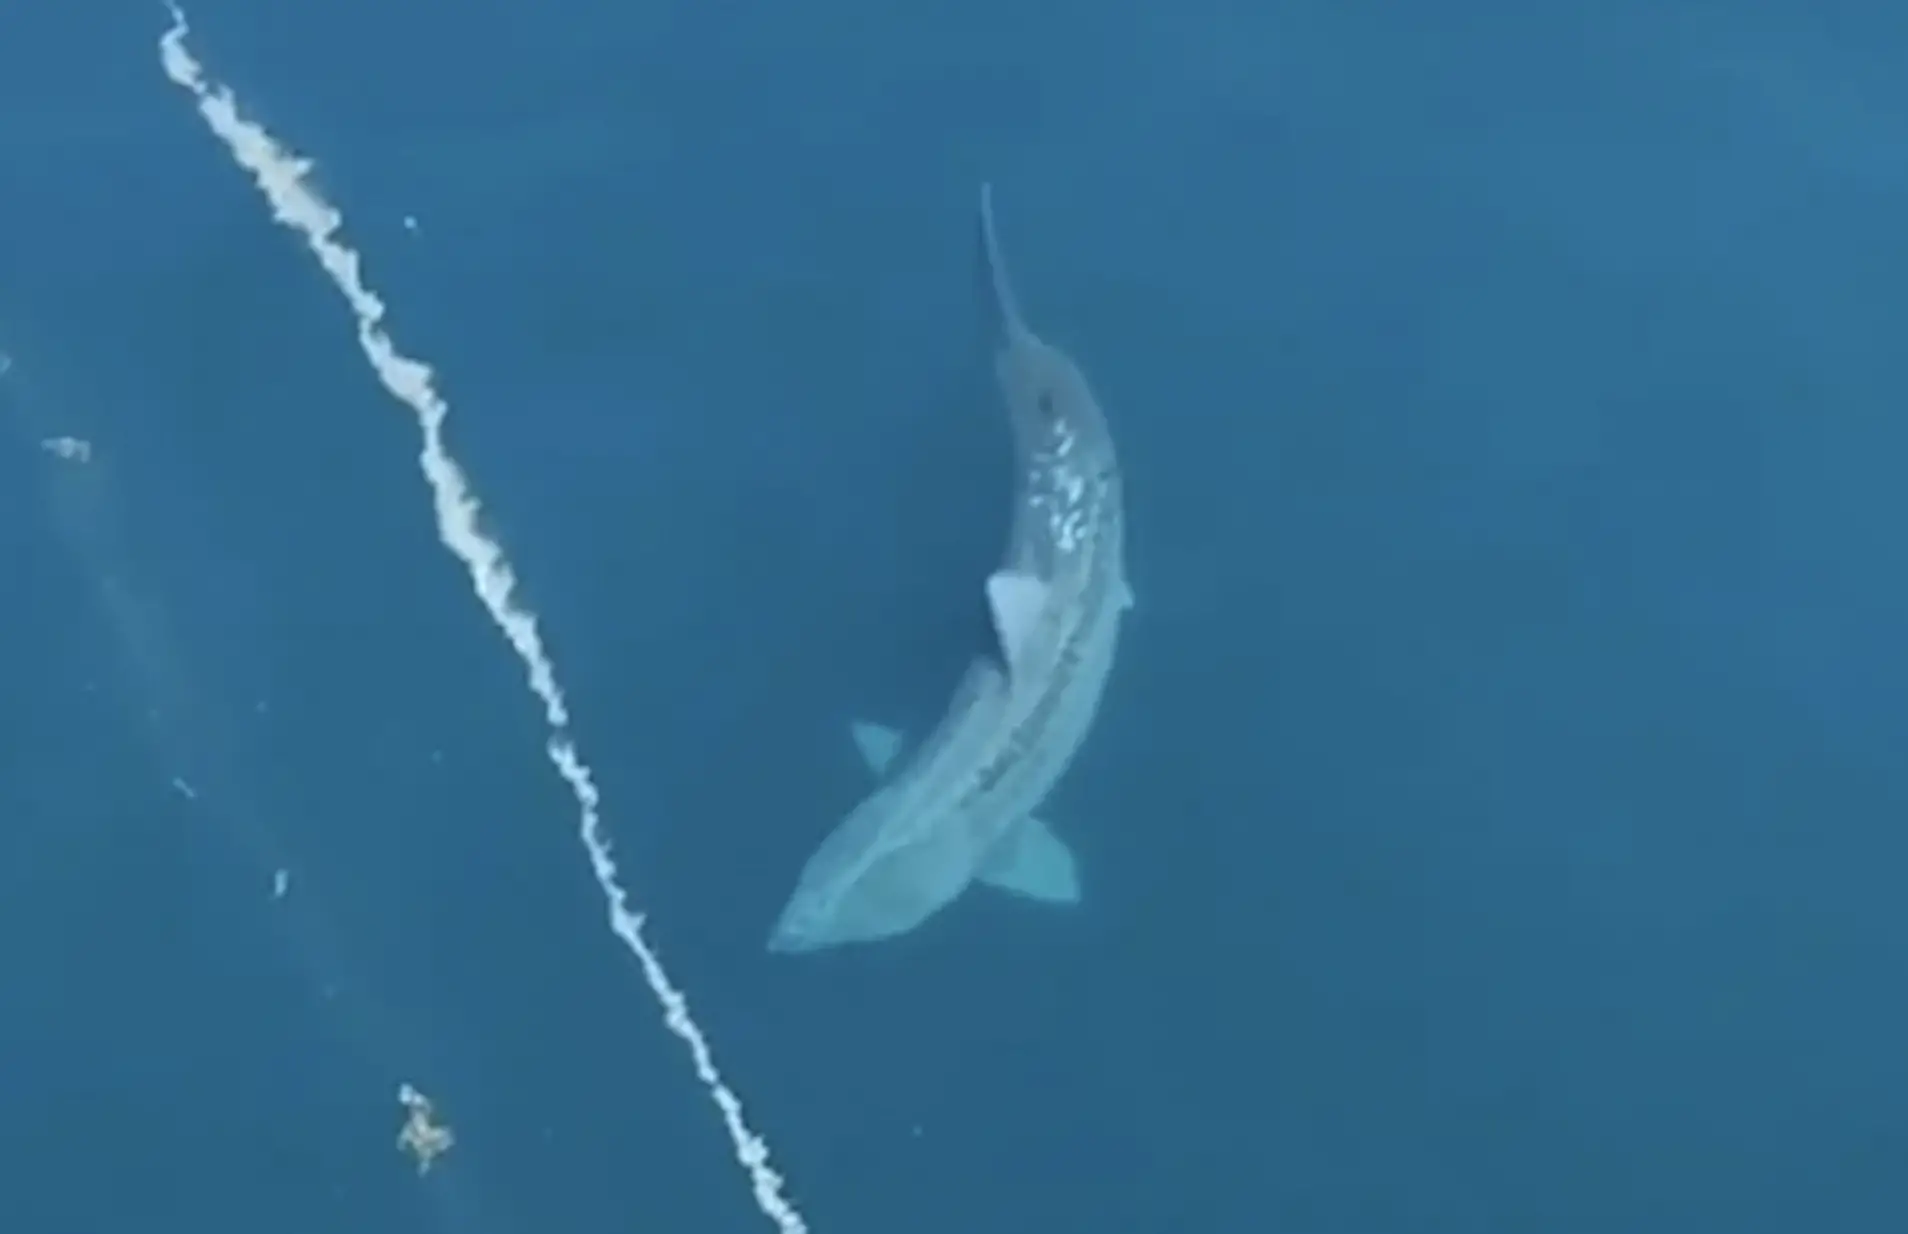 The viral video, garnering 40 million views on TikTok, sparked speculation about a megalodon.